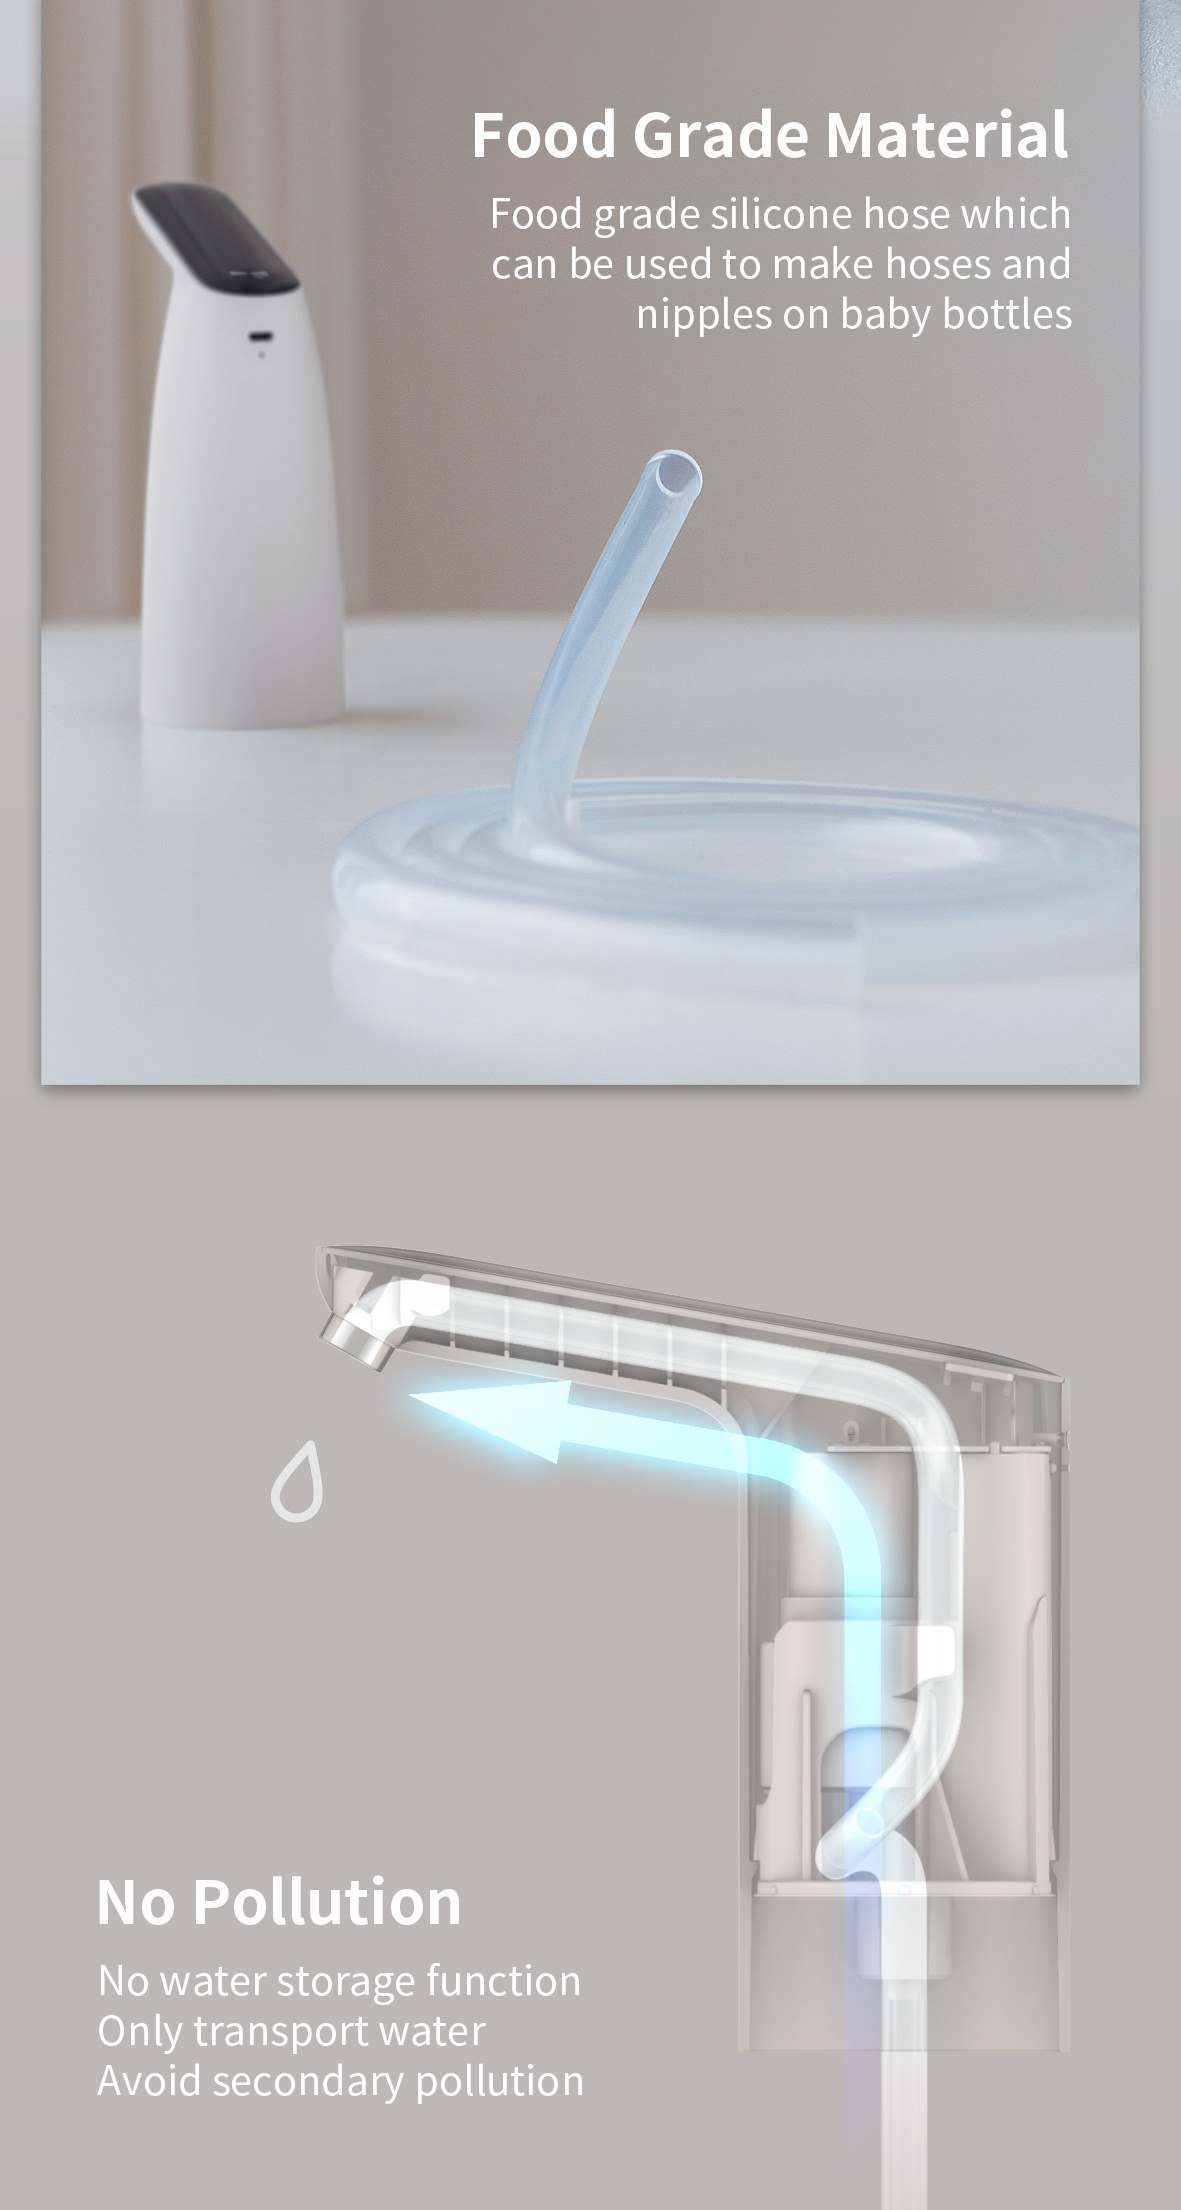 xiaomi 3life rechargeable electric water pump touch dispenser